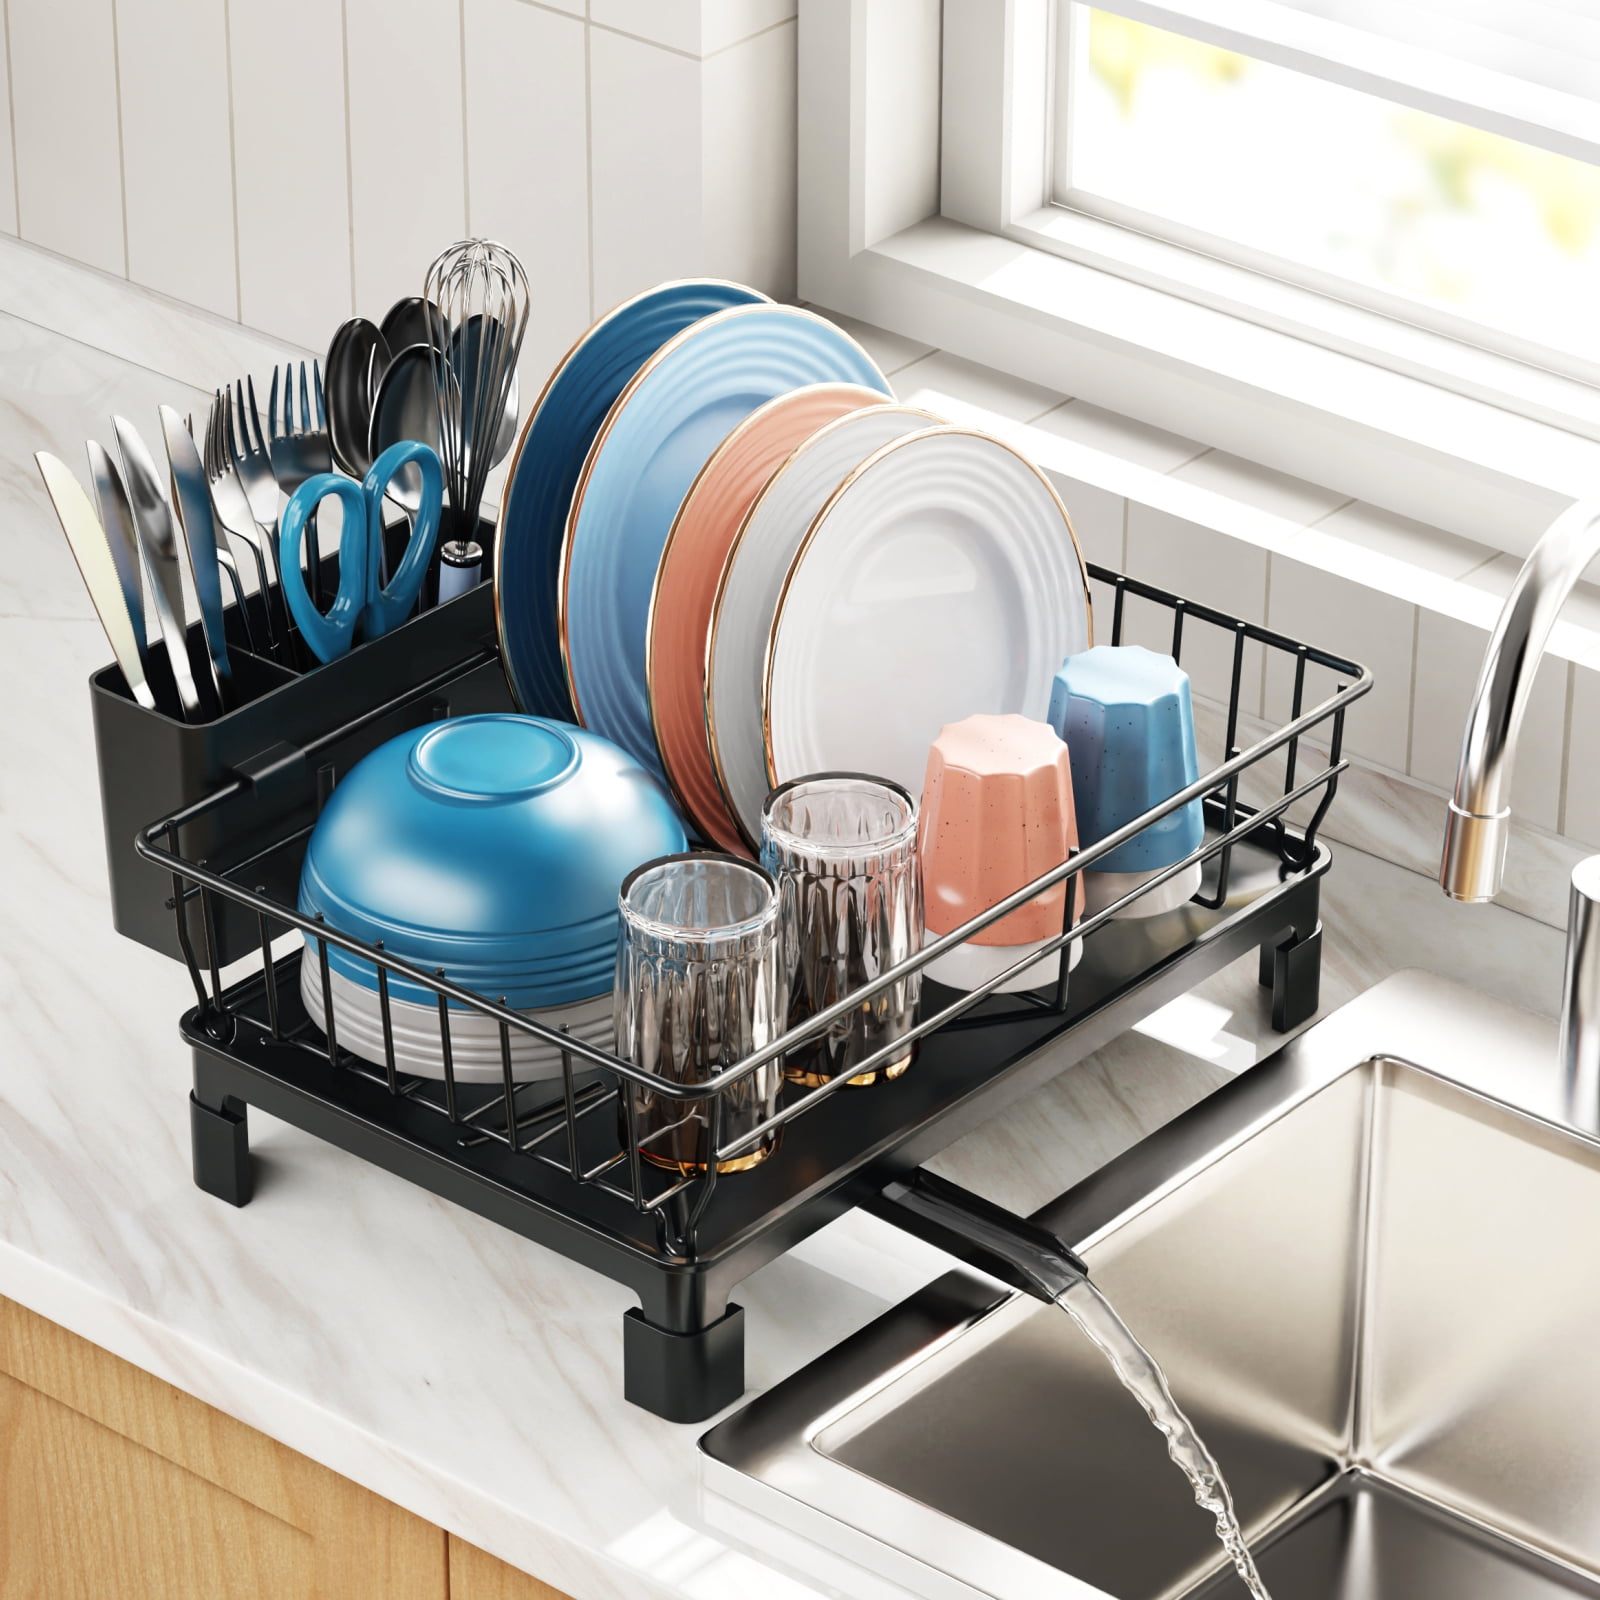 iSPECLE Dish Drying Rack with Drainboard - Compact Dish Racks for ...